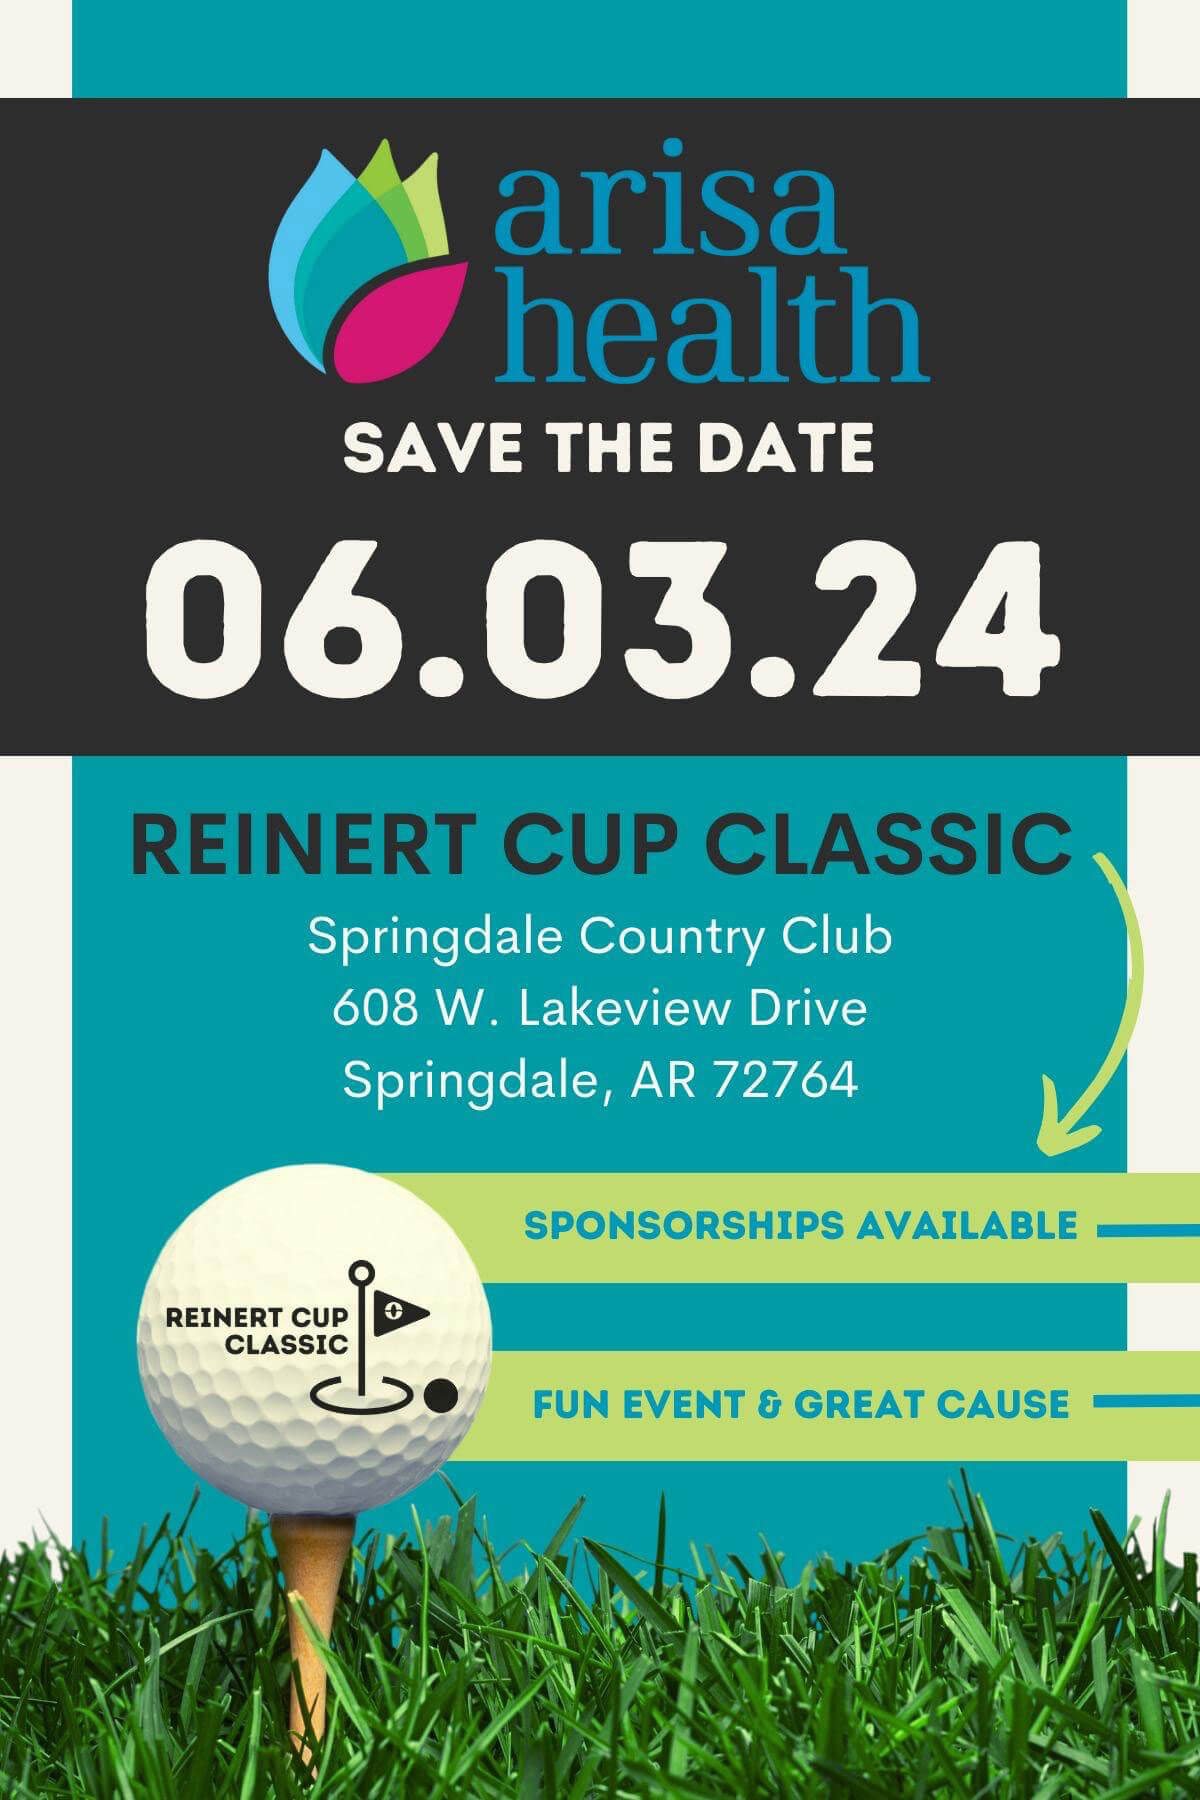 Springdale Country Club, 608 West Lakeview Drive, Springdale, Arkansas 72764 | Sponsorship available, Fun event and great cause